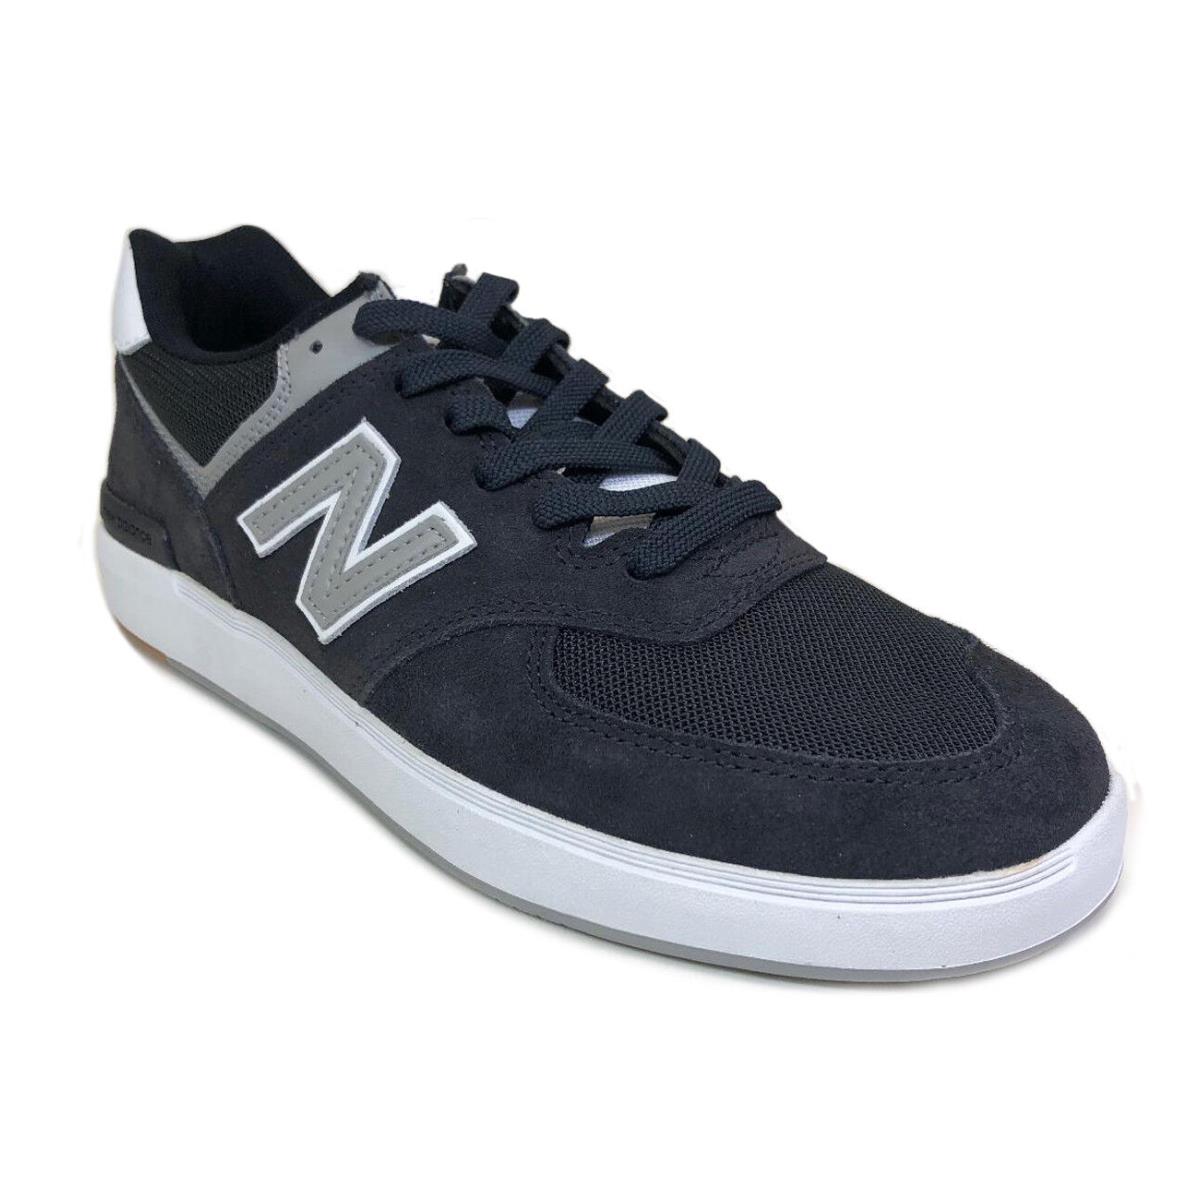 New Balance AM574 Navy Suede Shoes